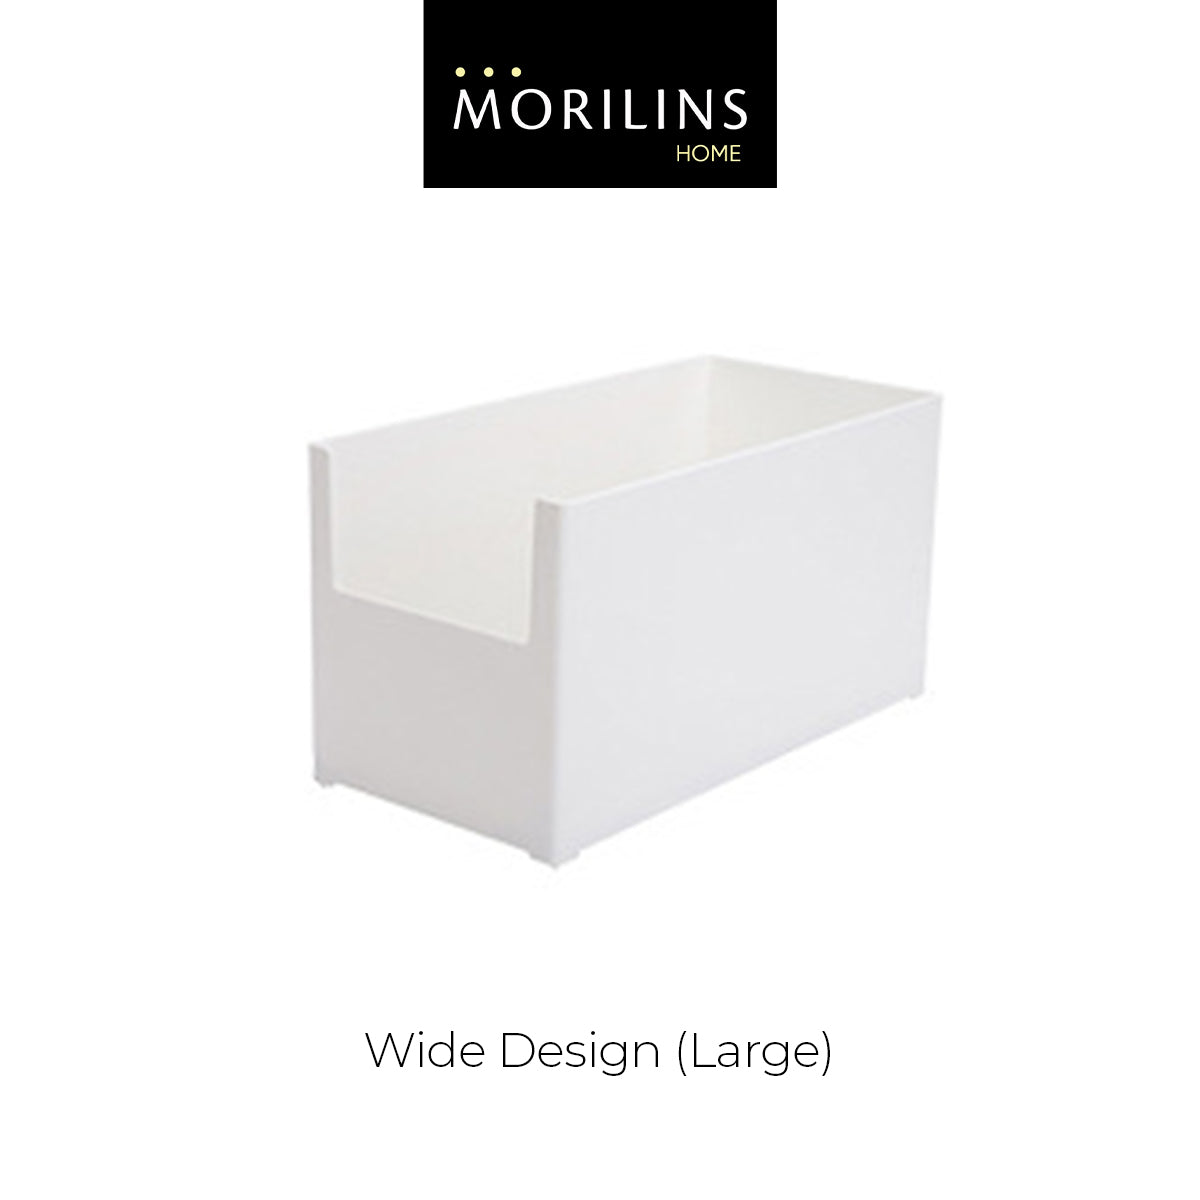 [Morilins Home] White Japanese-Style Modular Stackable Storage Box with Label Holder - Clean & Tidy Look with Easy Access for Sundries, Snacks, Kitchenware & Cosmetics - Bloom Concept